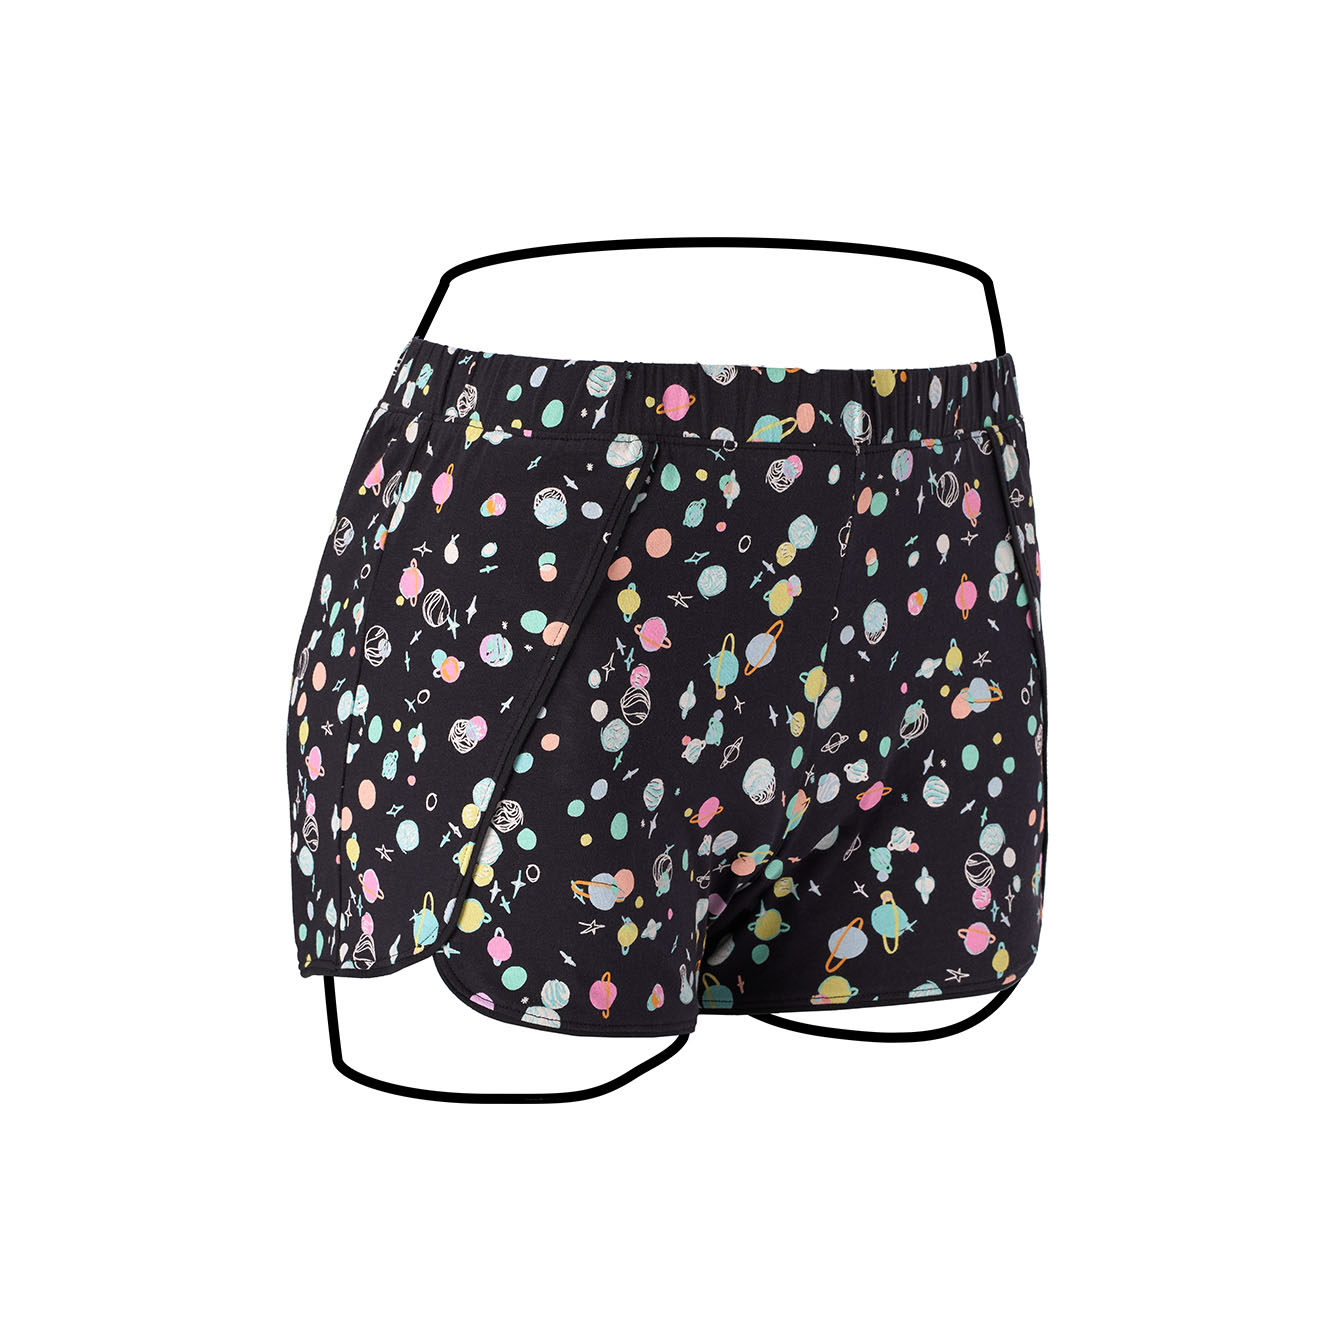 Thinx: Have you heard about our Sleep Shorts?